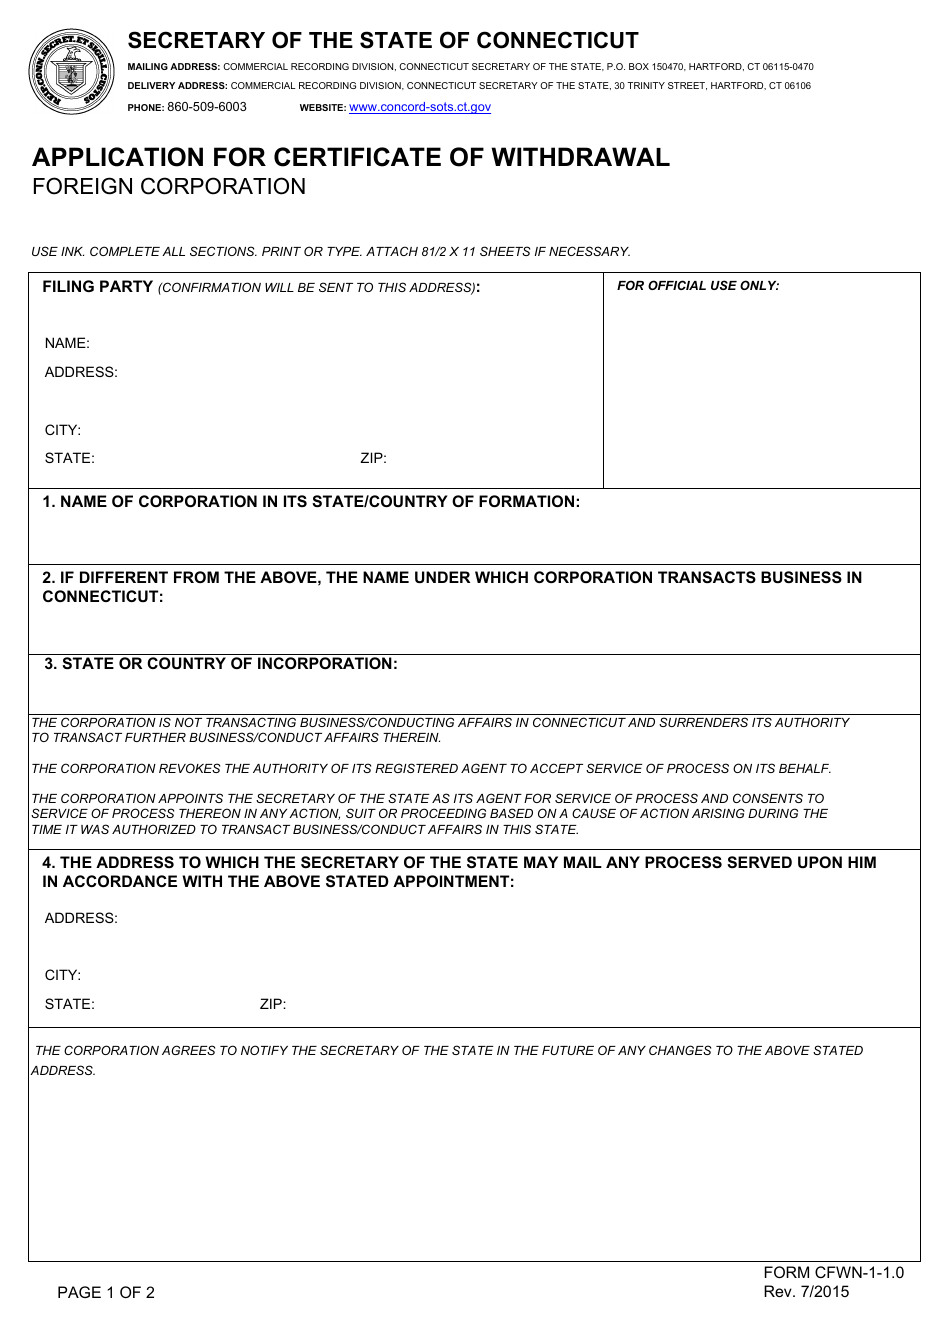 Form CFWN-1-1.0 Application for Certificate of Withdrawal - Foreign Corporation - Connecticut, Page 1